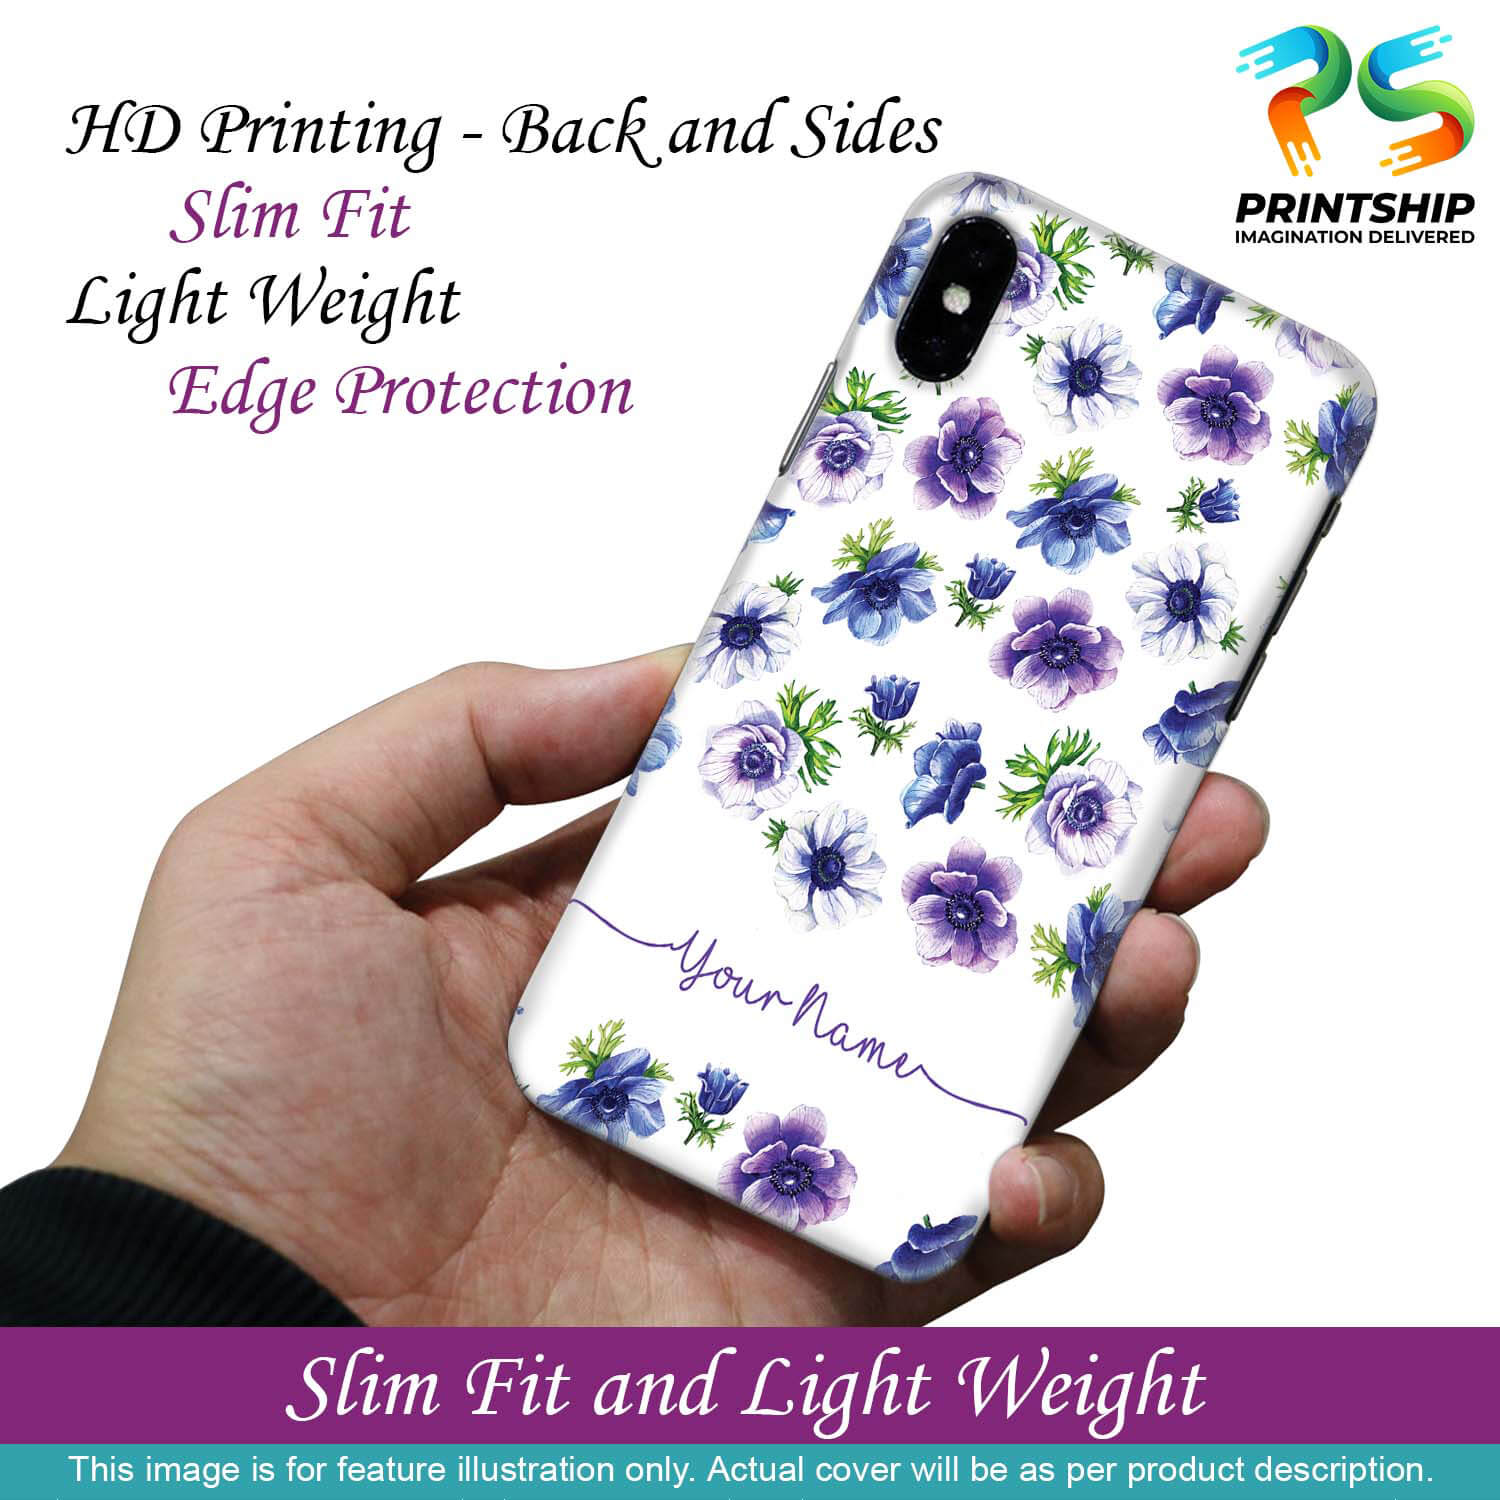 IK5005-Purple Flowers with Name Back Cover for OnePlus 7T Pro